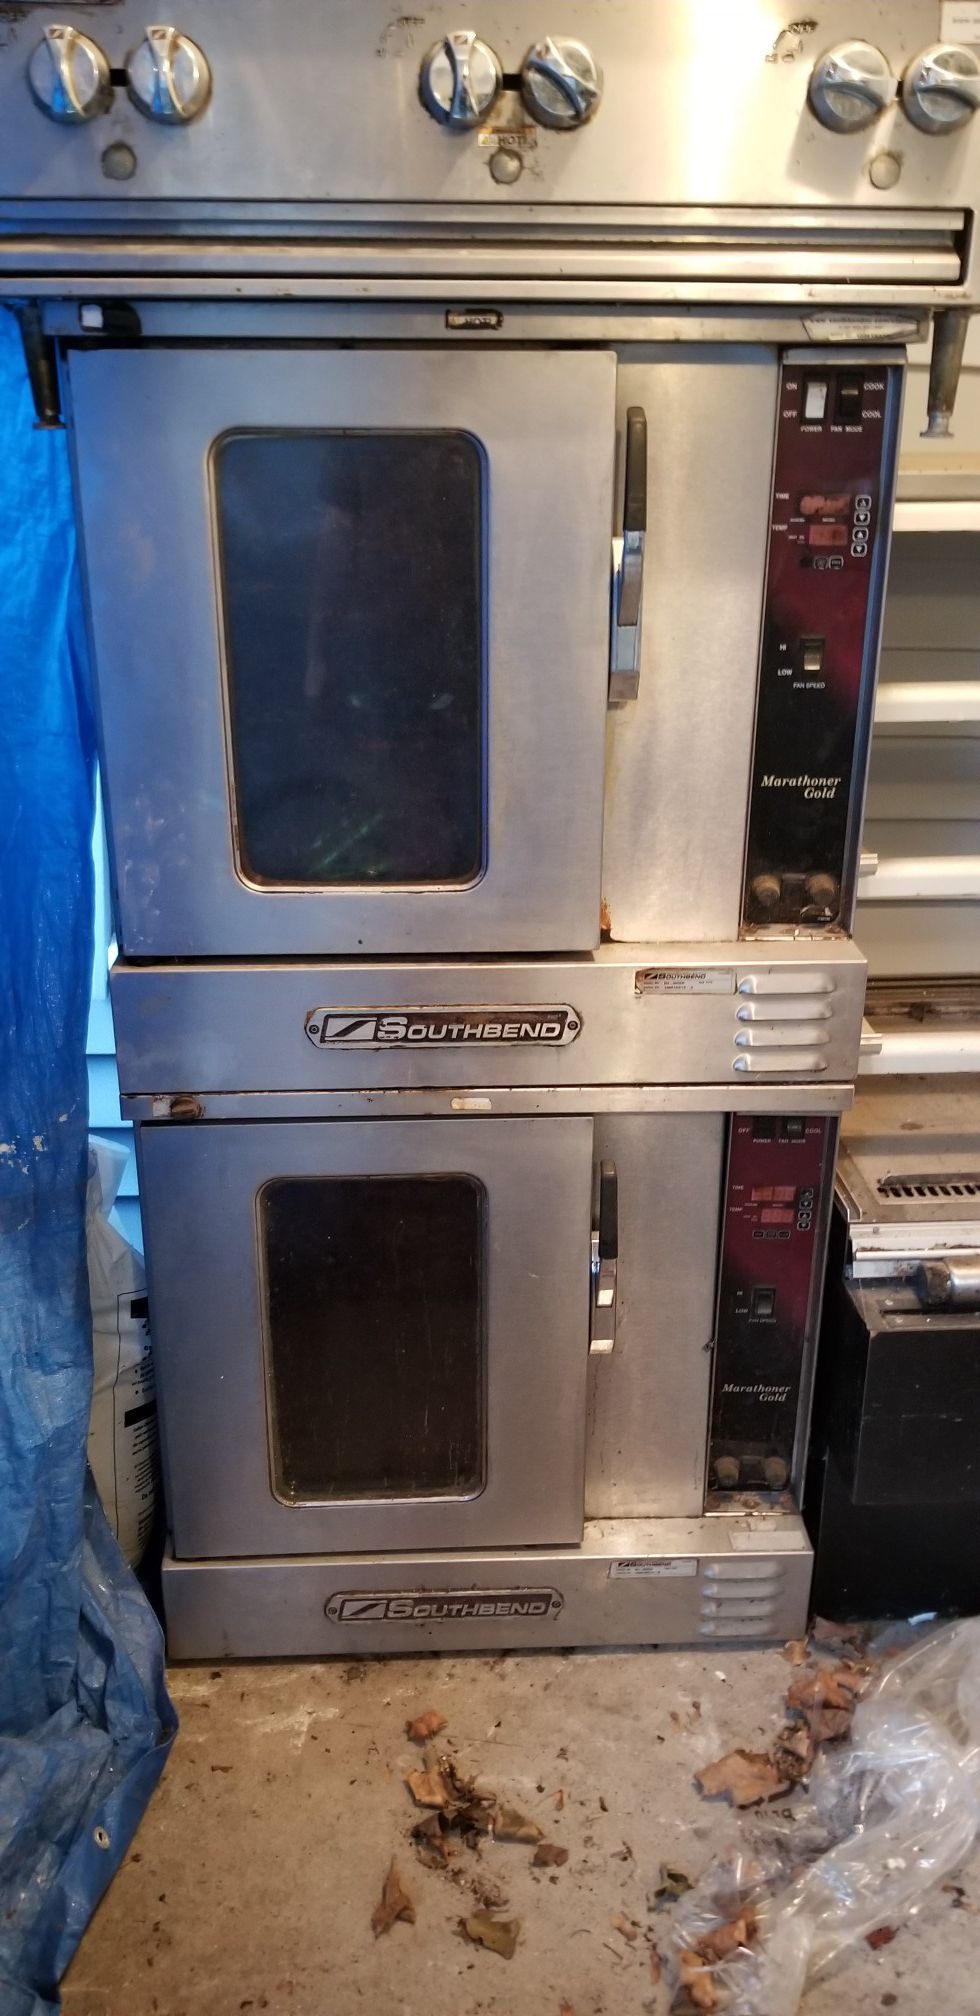 Southbend Convection oven electric